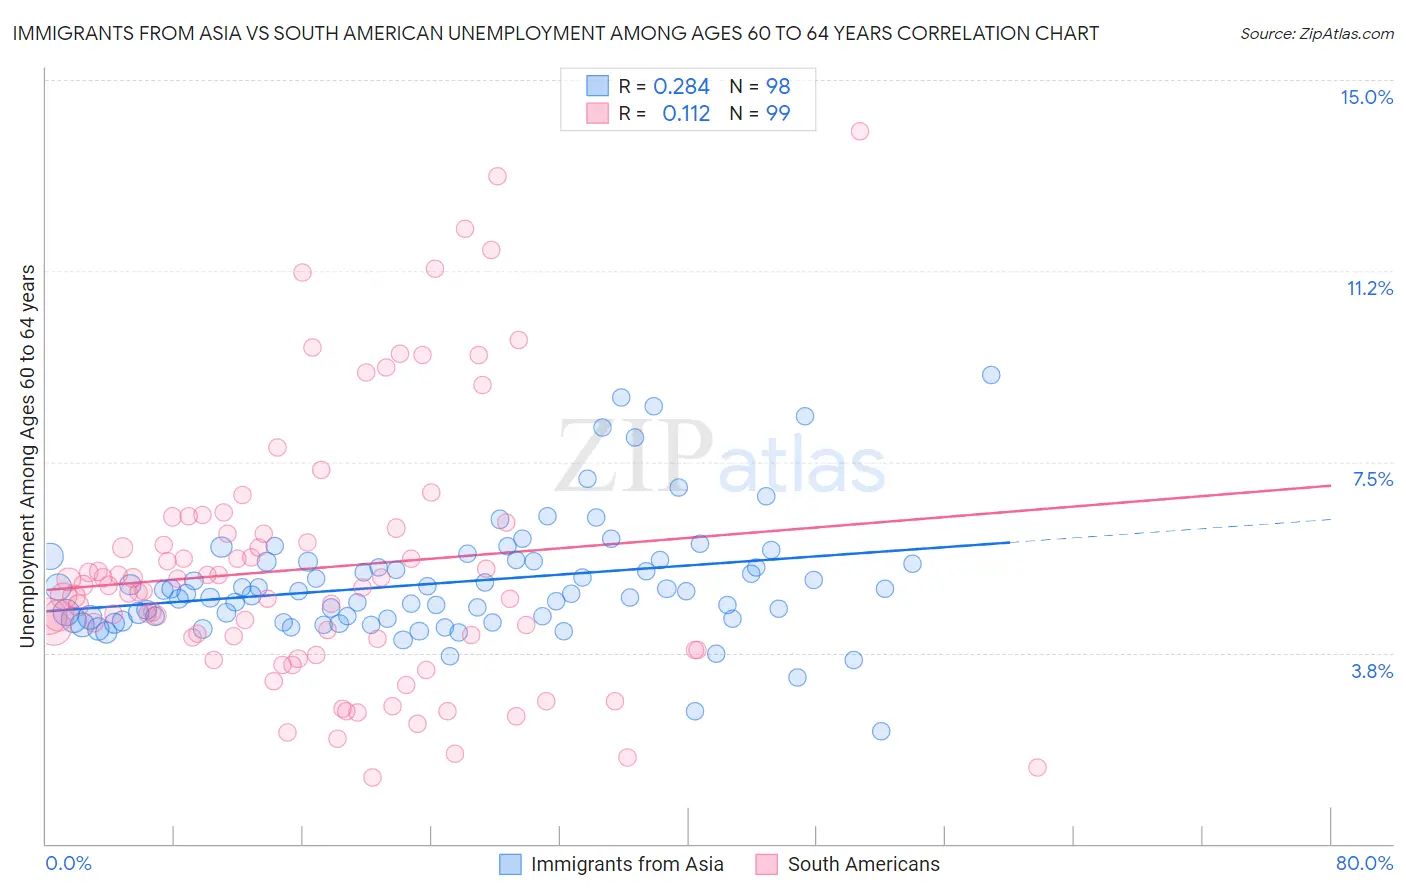 Immigrants from Asia vs South American Unemployment Among Ages 60 to 64 years